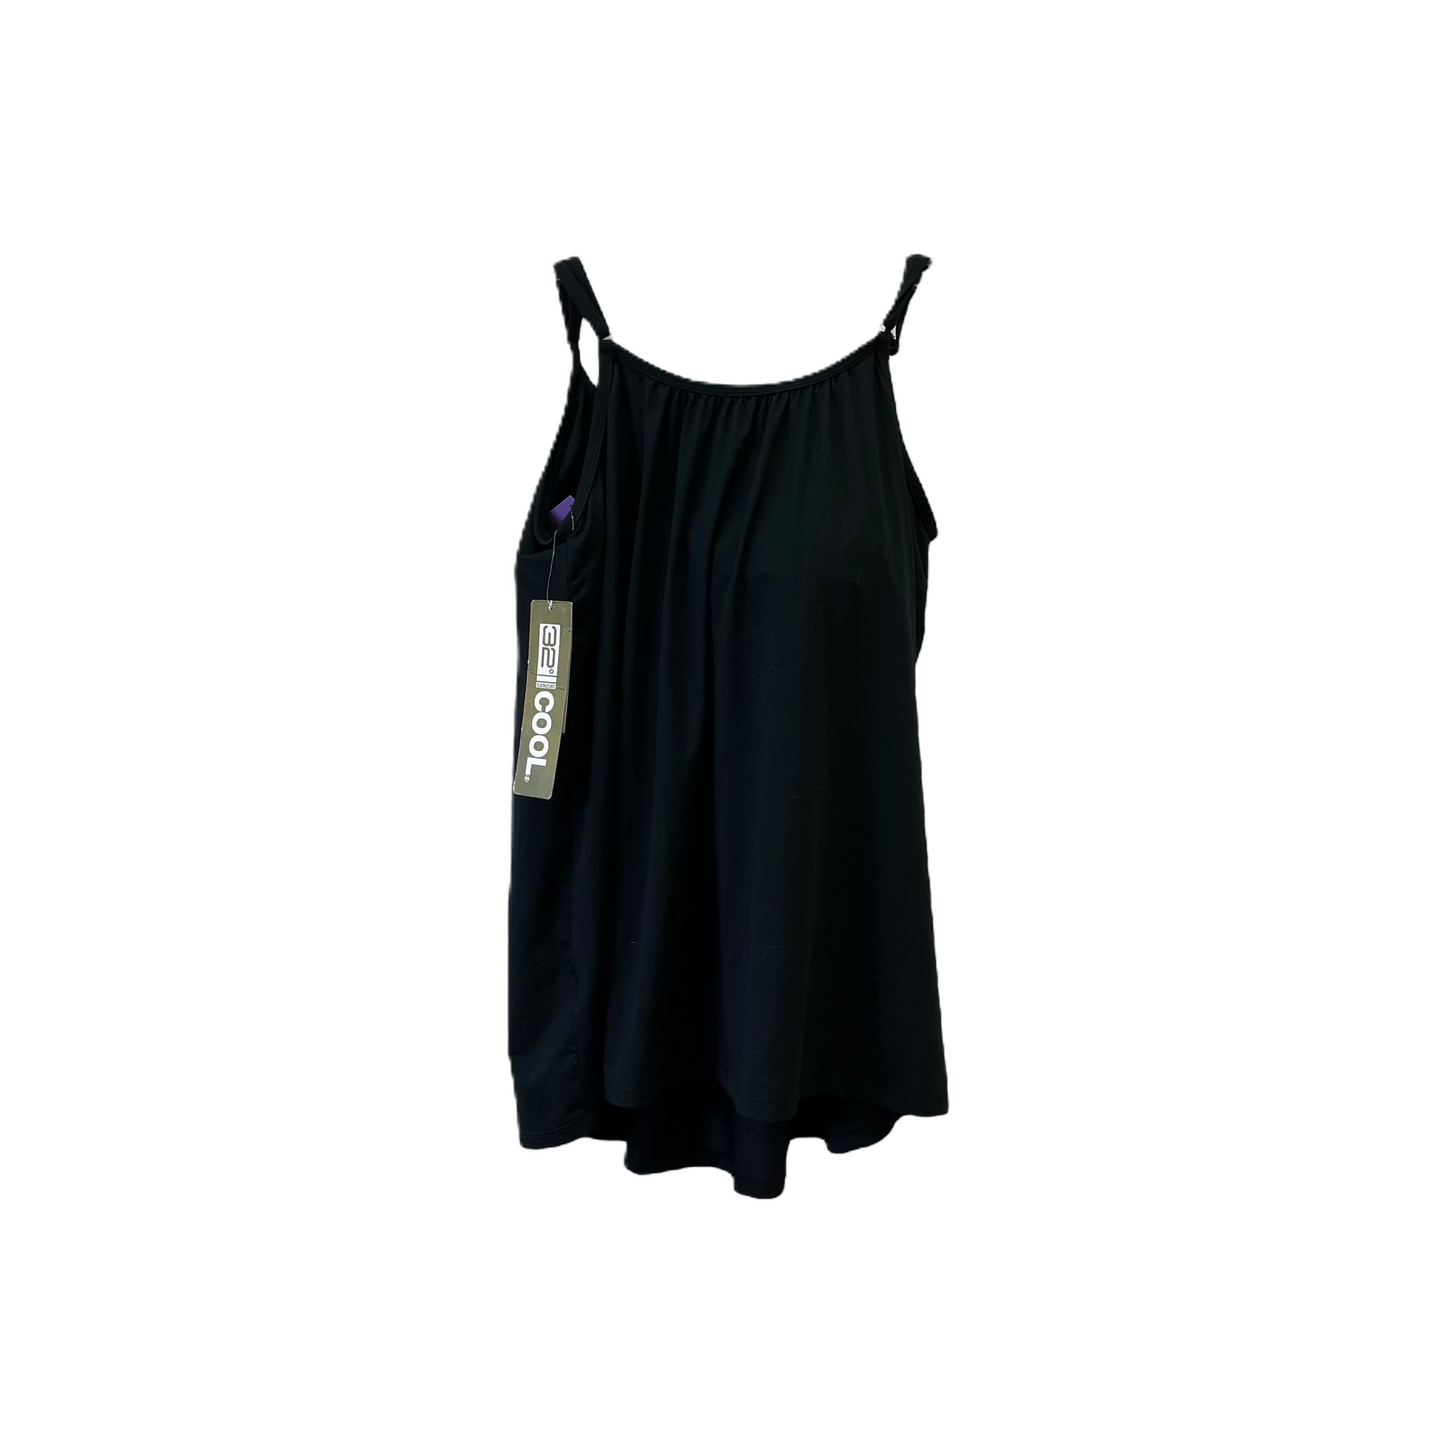 Black Athletic Tank Top By 32 Degrees, Size: L